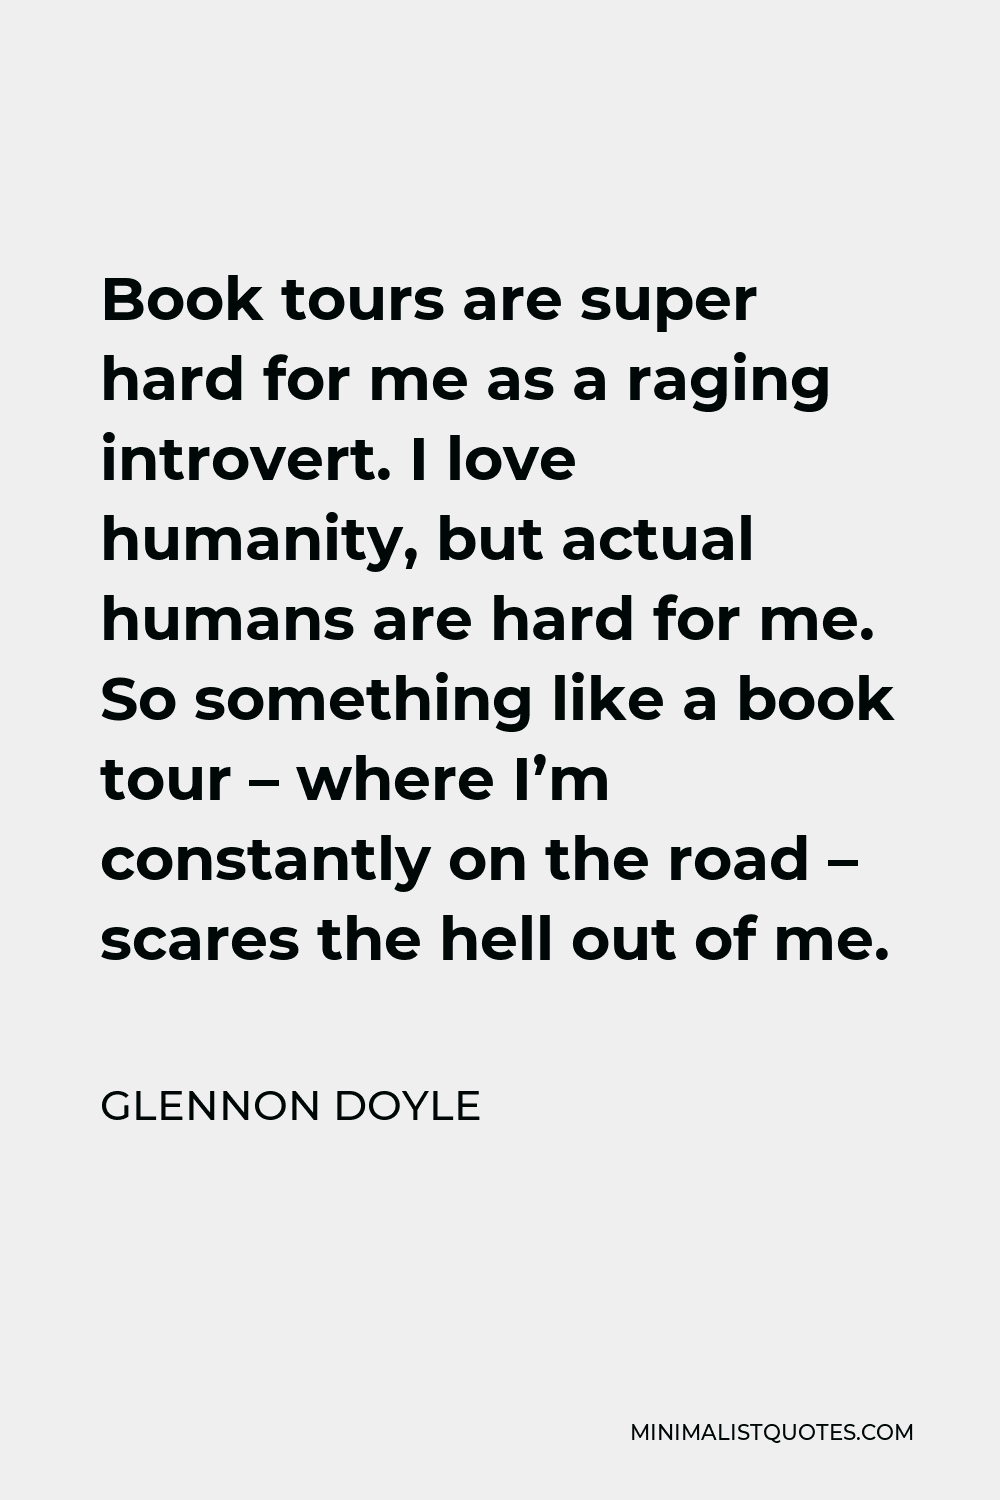 Glennon Doyle Quote - Book tours are super hard for me as a raging introvert. I love humanity, but actual humans are hard for me. So something like a book tour – where I’m constantly on the road – scares the hell out of me.